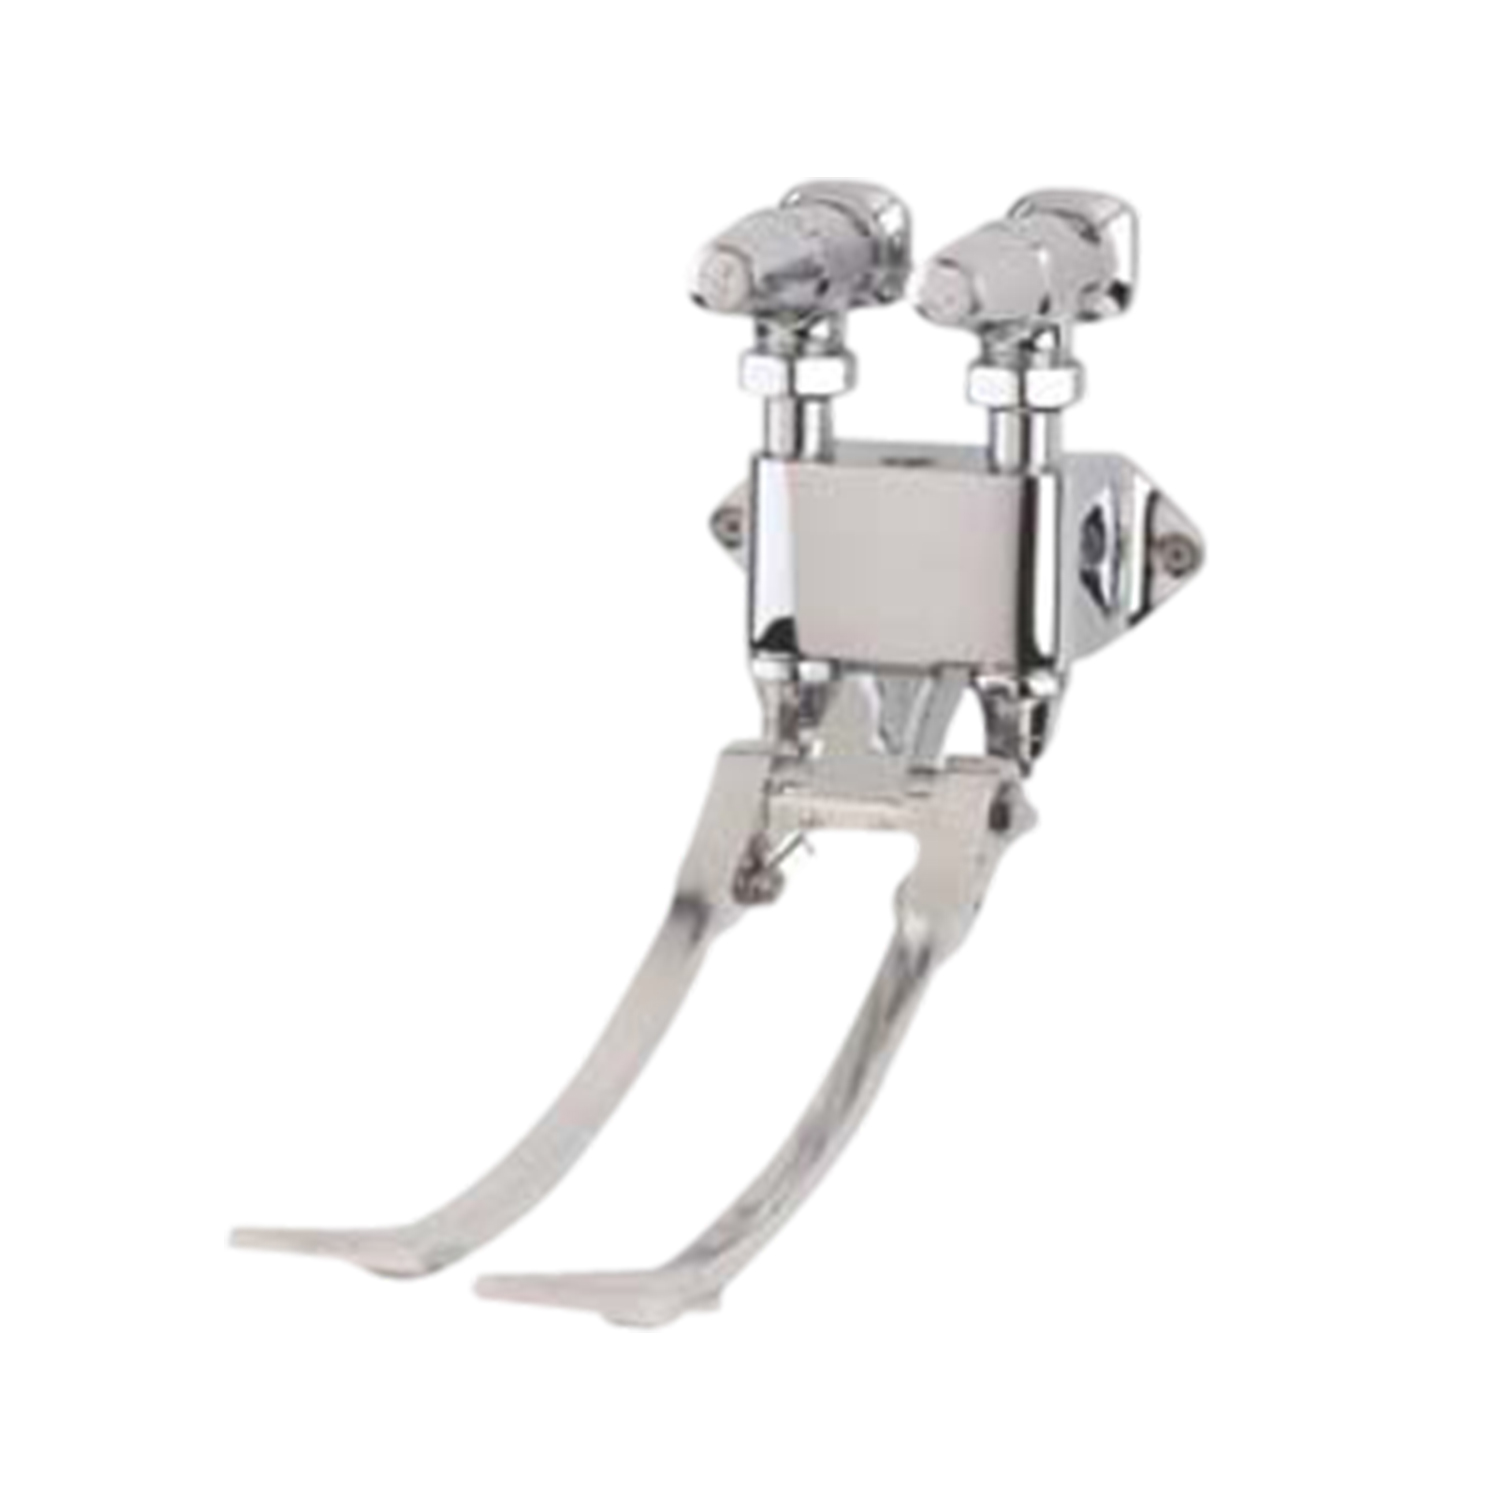 Avante Dual Extended Pedal Foot-Operated Valve